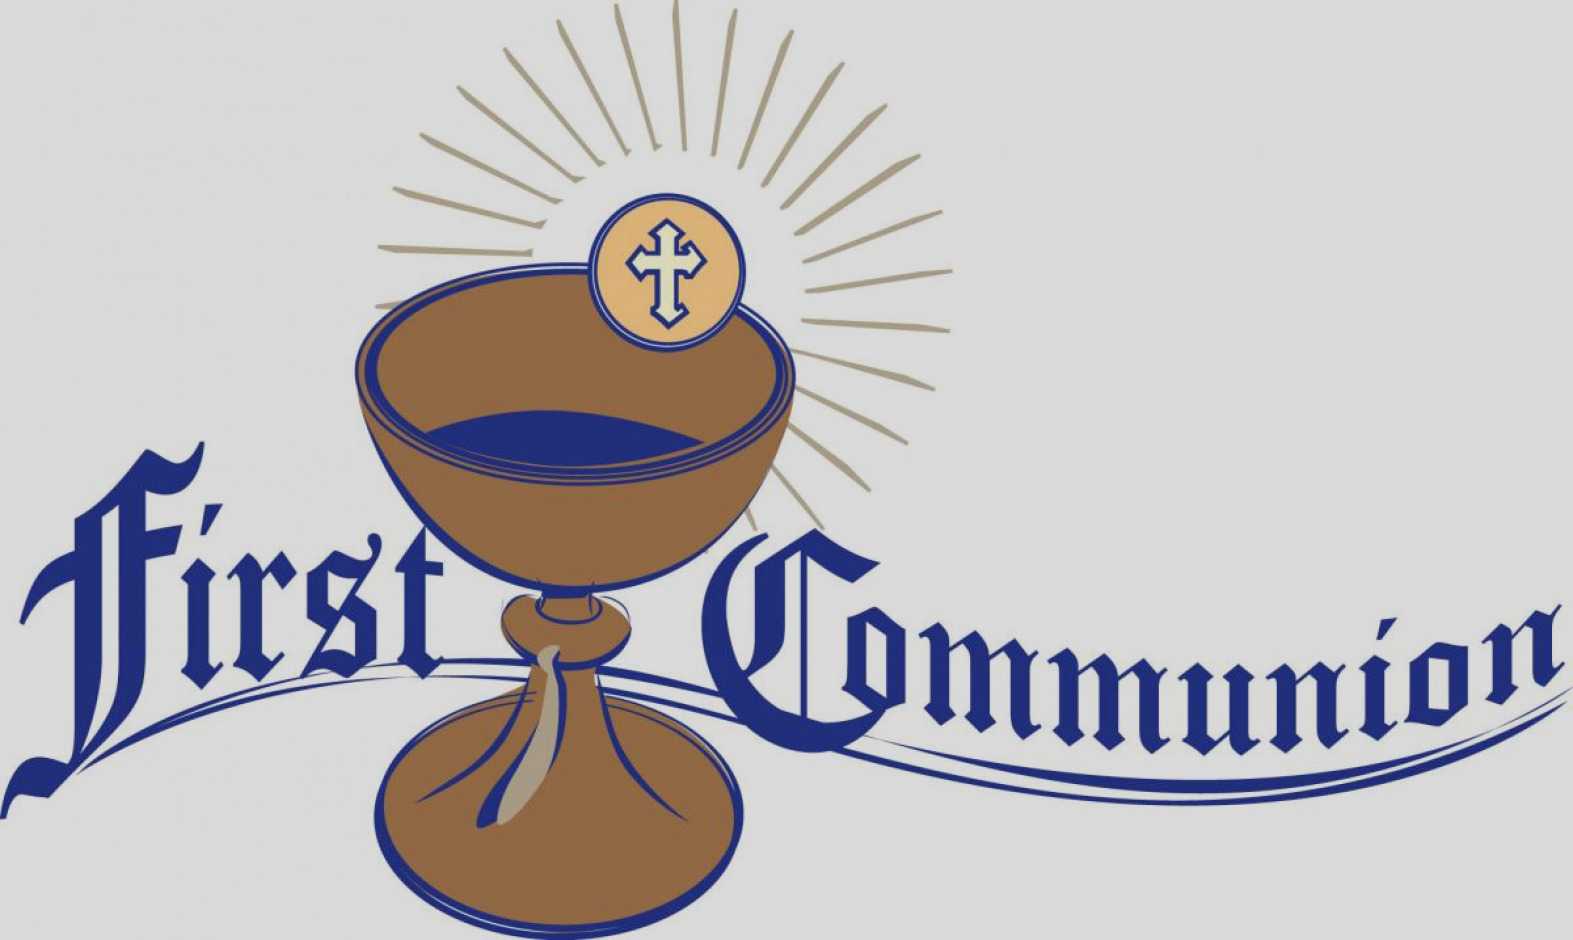 First Clipart Comunion, Picture #42280 First Clipart Comunion In First Holy Communion Banner Templates